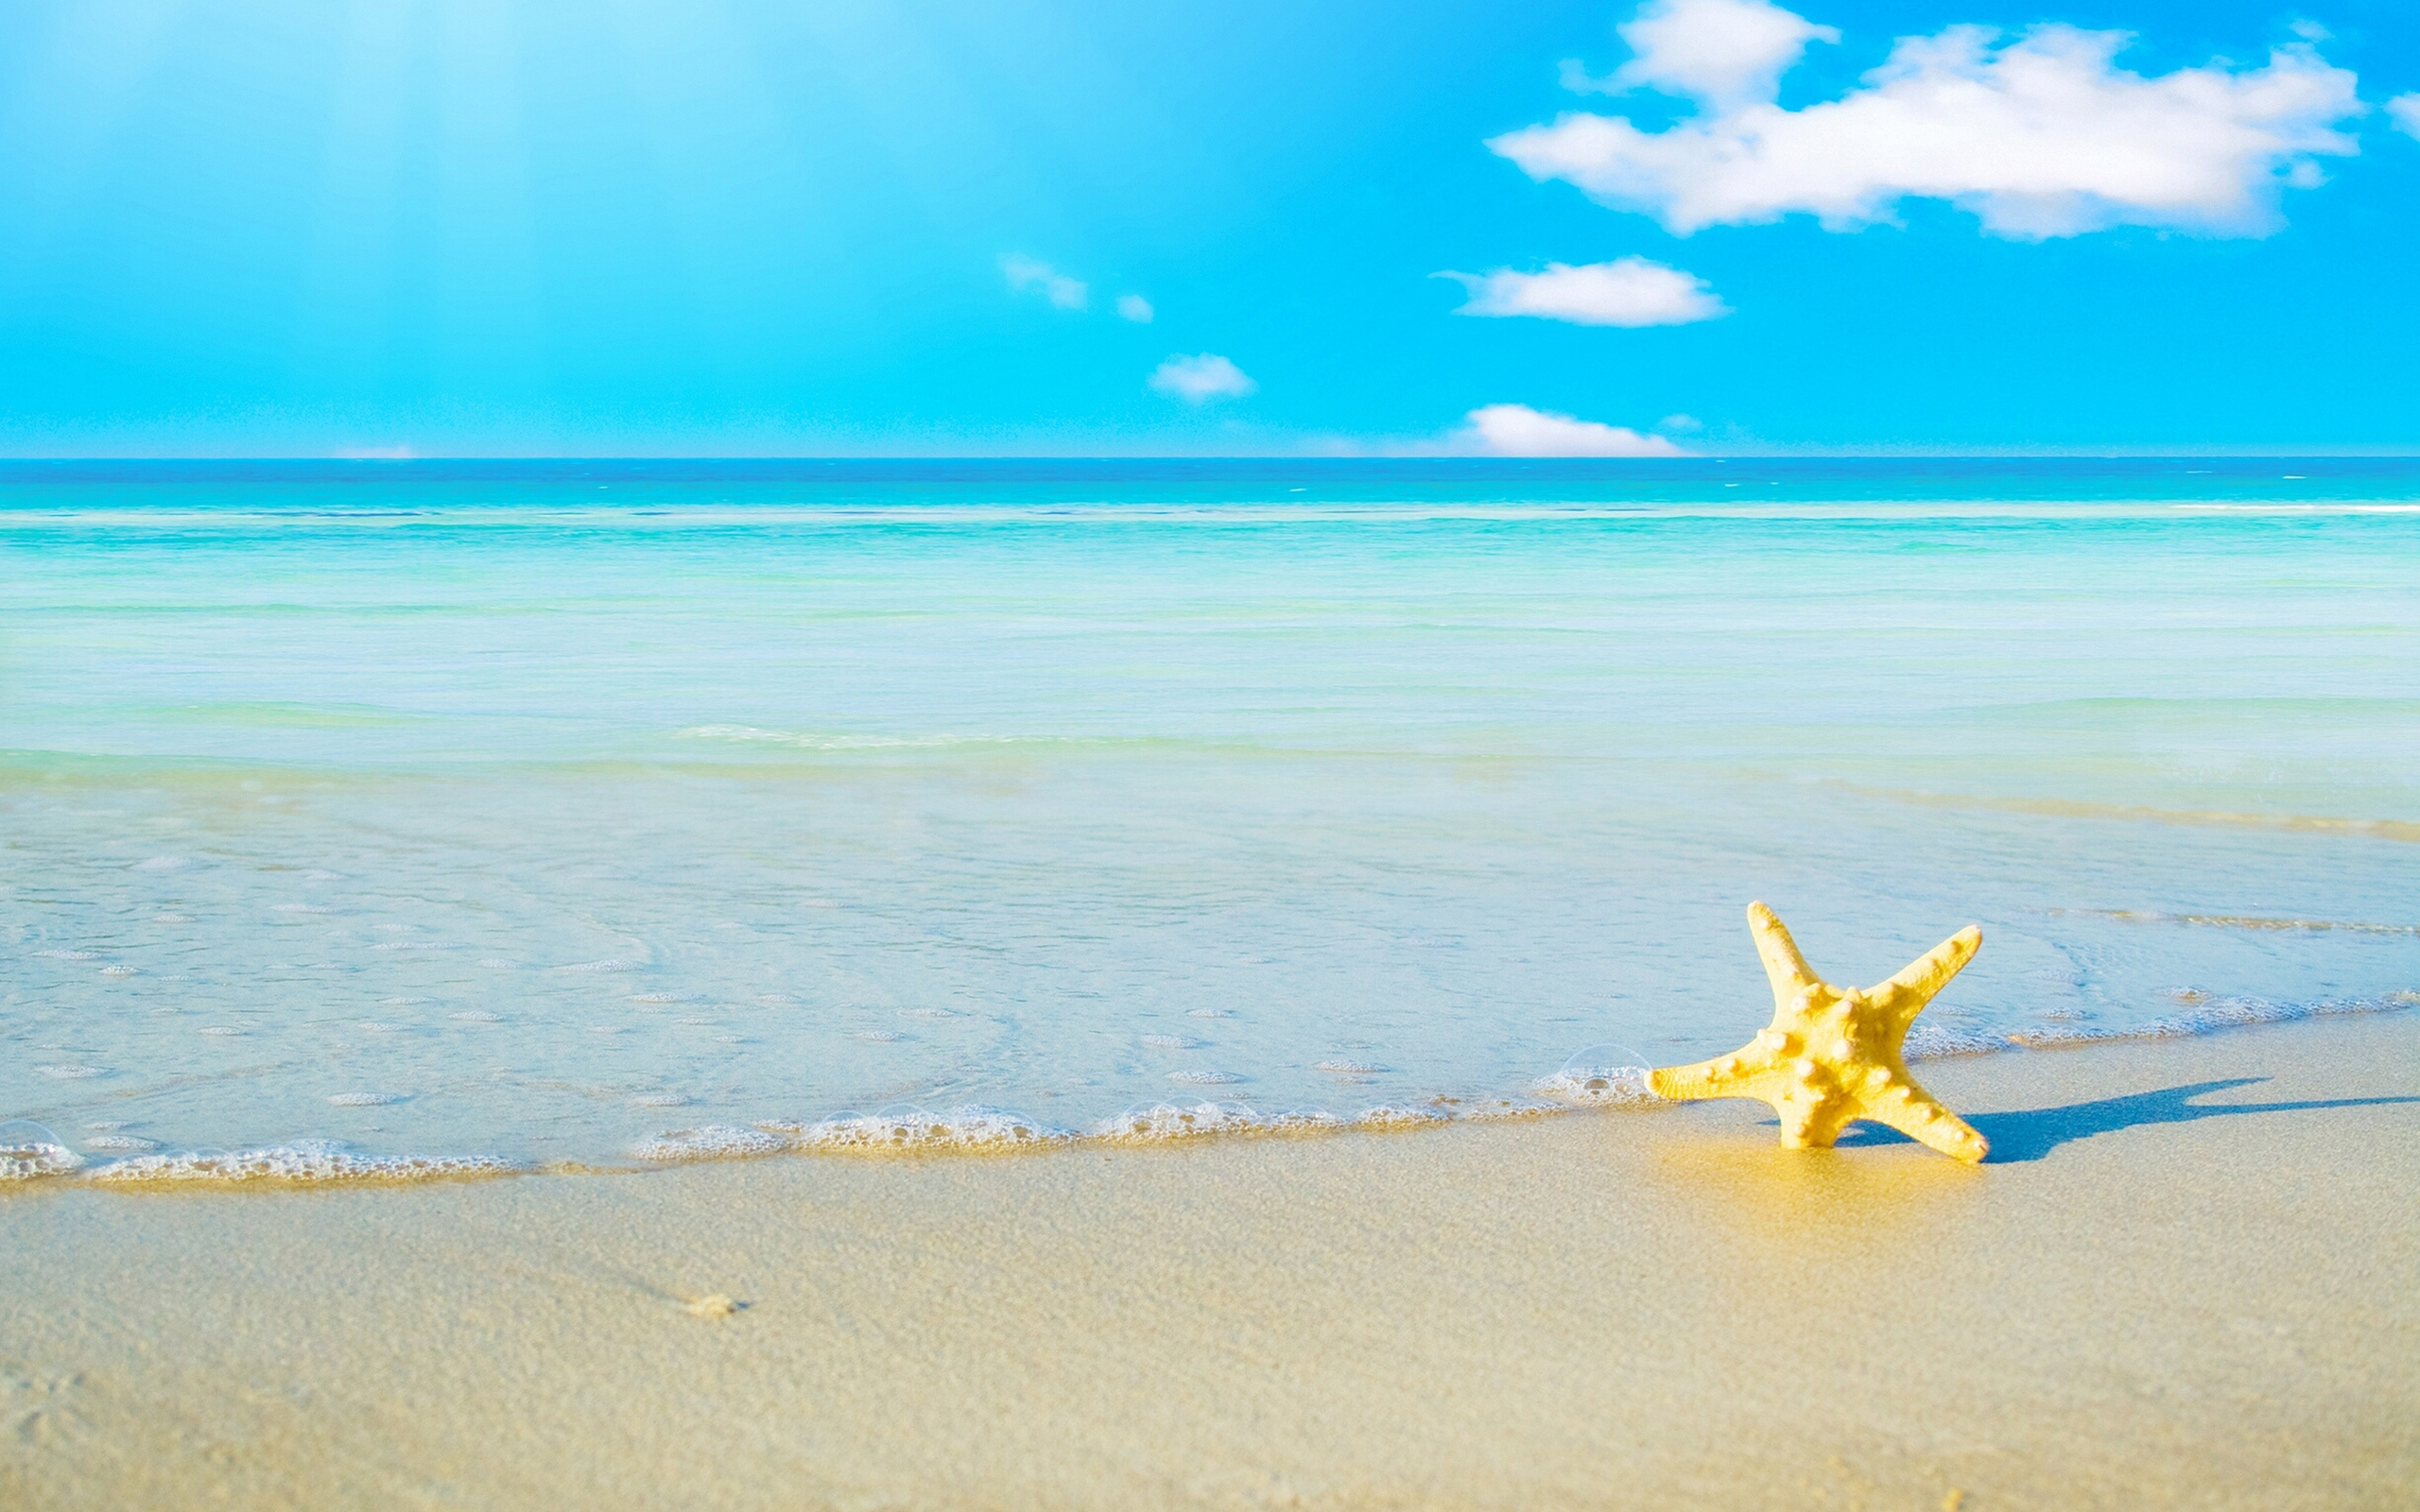 Free Beach Screensavers And Wallpapers Starfish On The Beach photos of